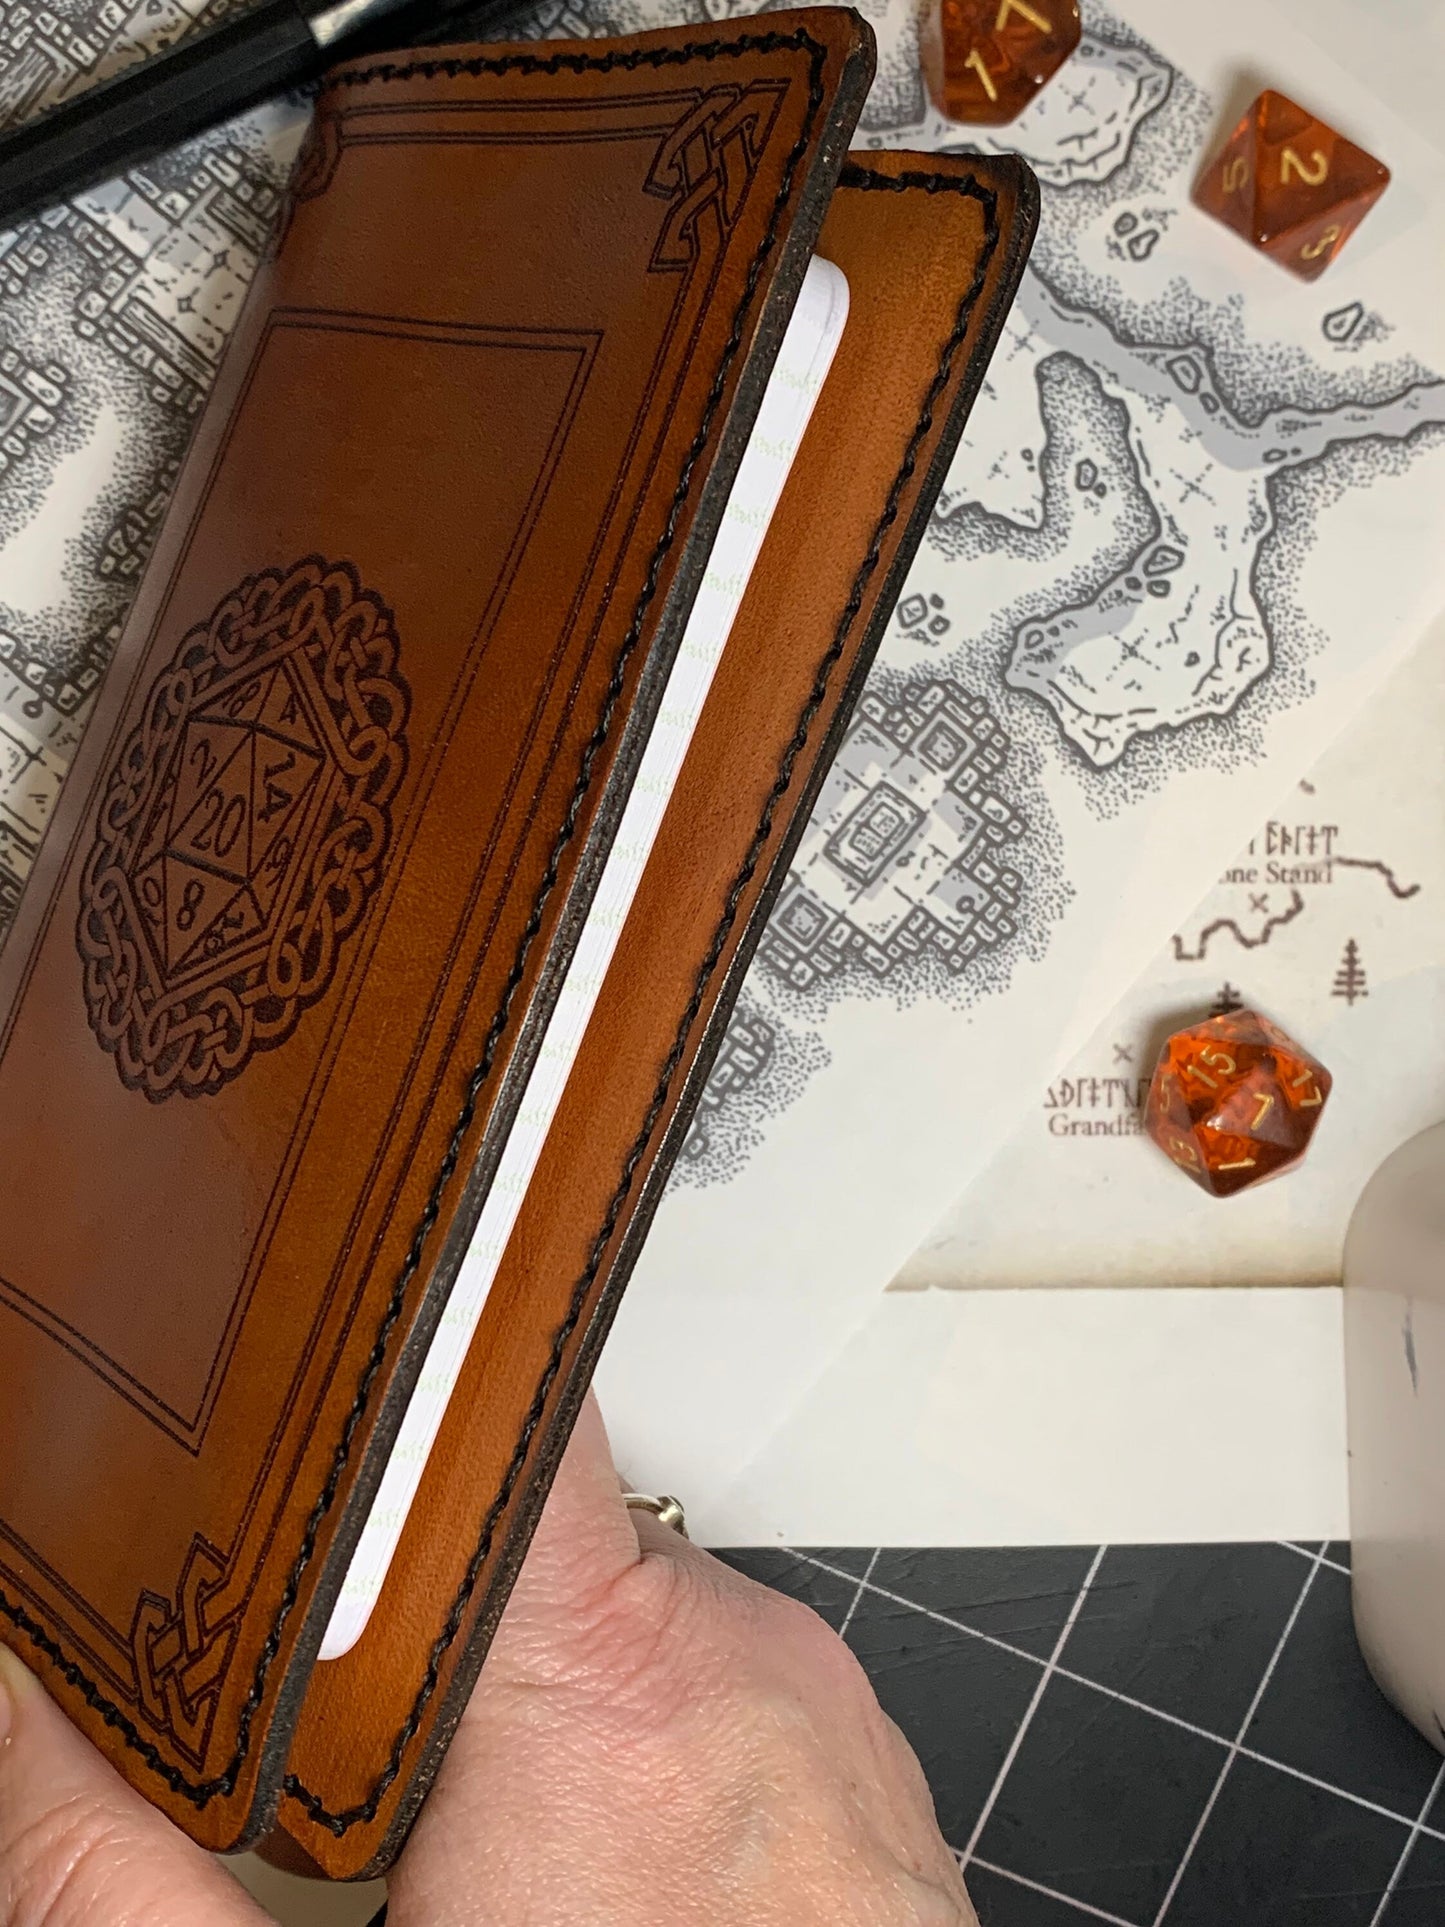 Game Notes Customizable Leather Journal with D20 and Celtic Knots